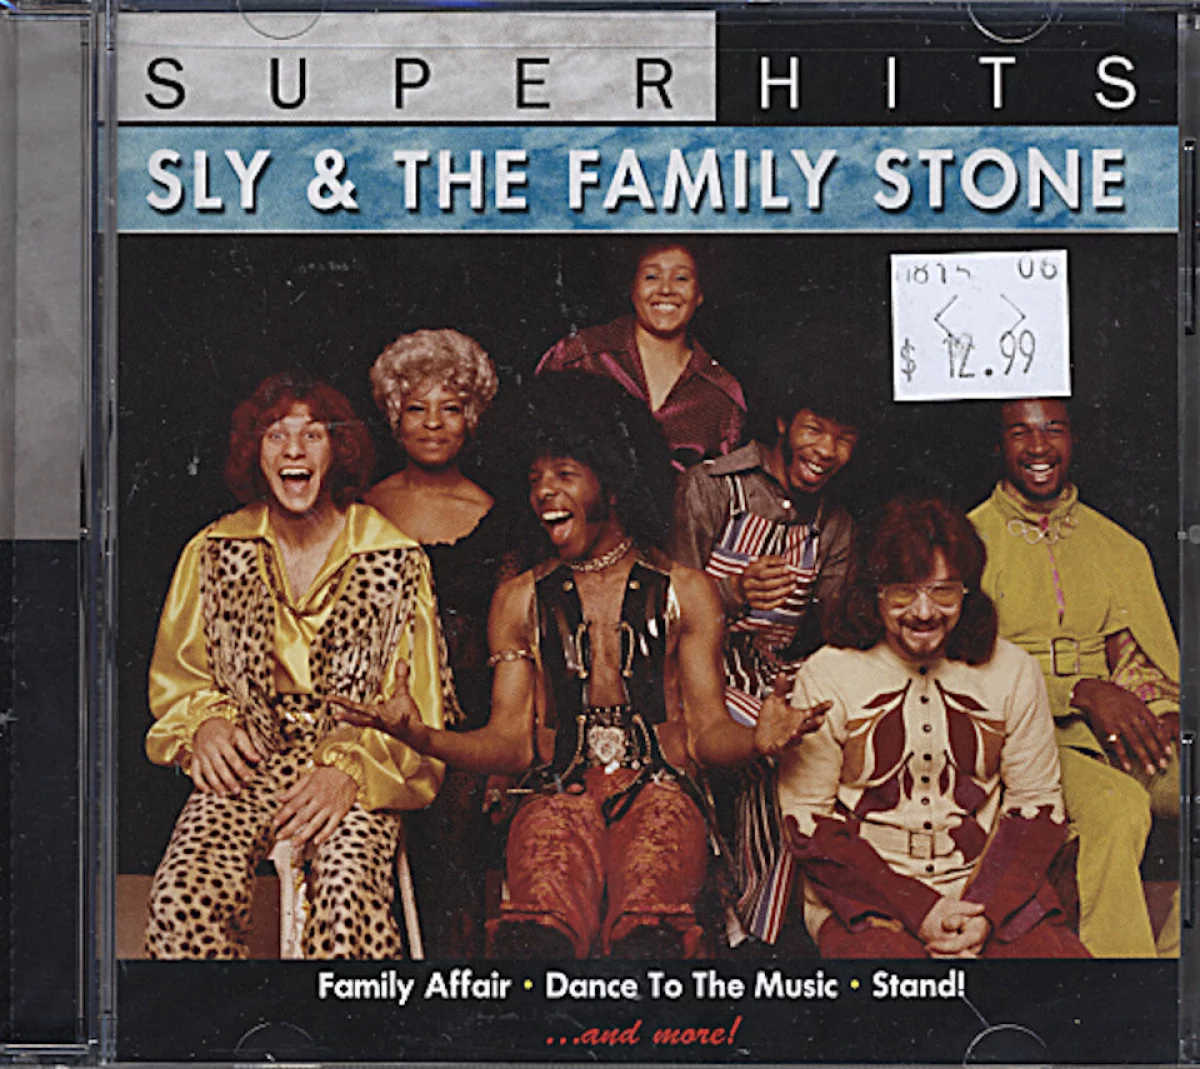 Sly & the Family Stone CD, 2010 at Wolfgang's